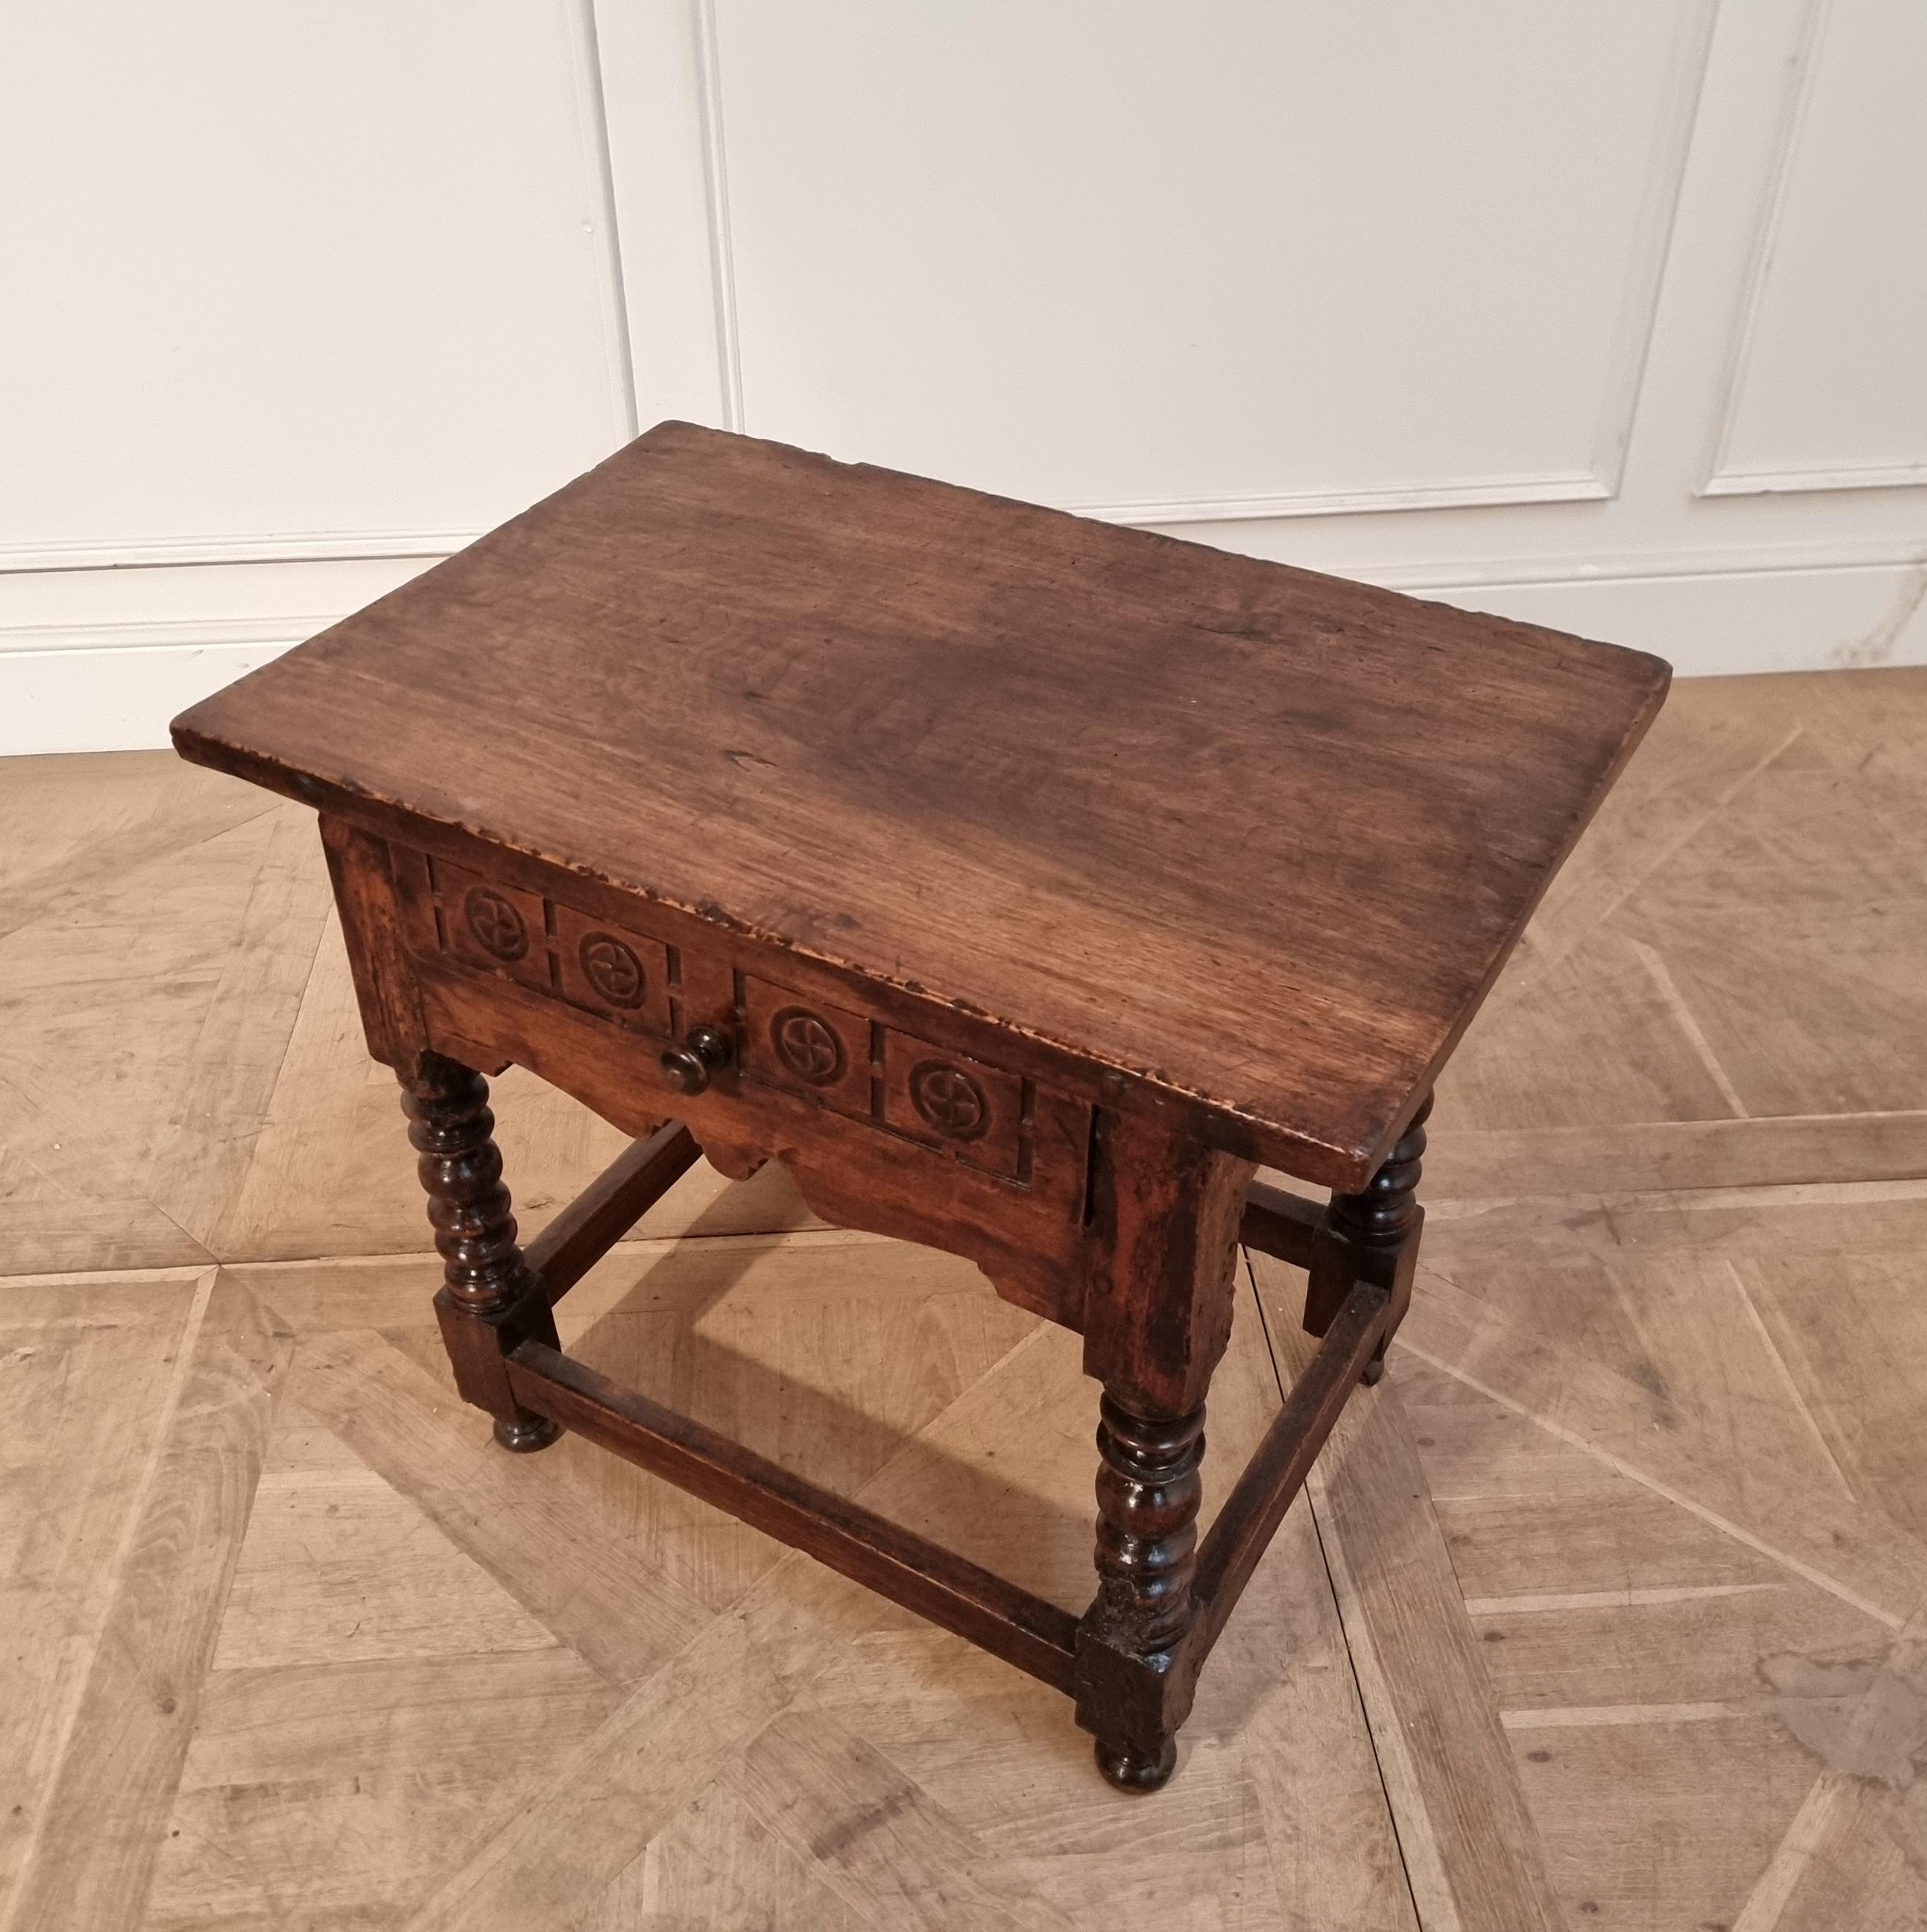 18th century Spanish walnut one drawer lamp table with a good thick top. 1770.

Dimensions
31.5 inches (80 cms) Wide
20.5 inches (52 cms) Deep
27 inches (69 cms) High.

     